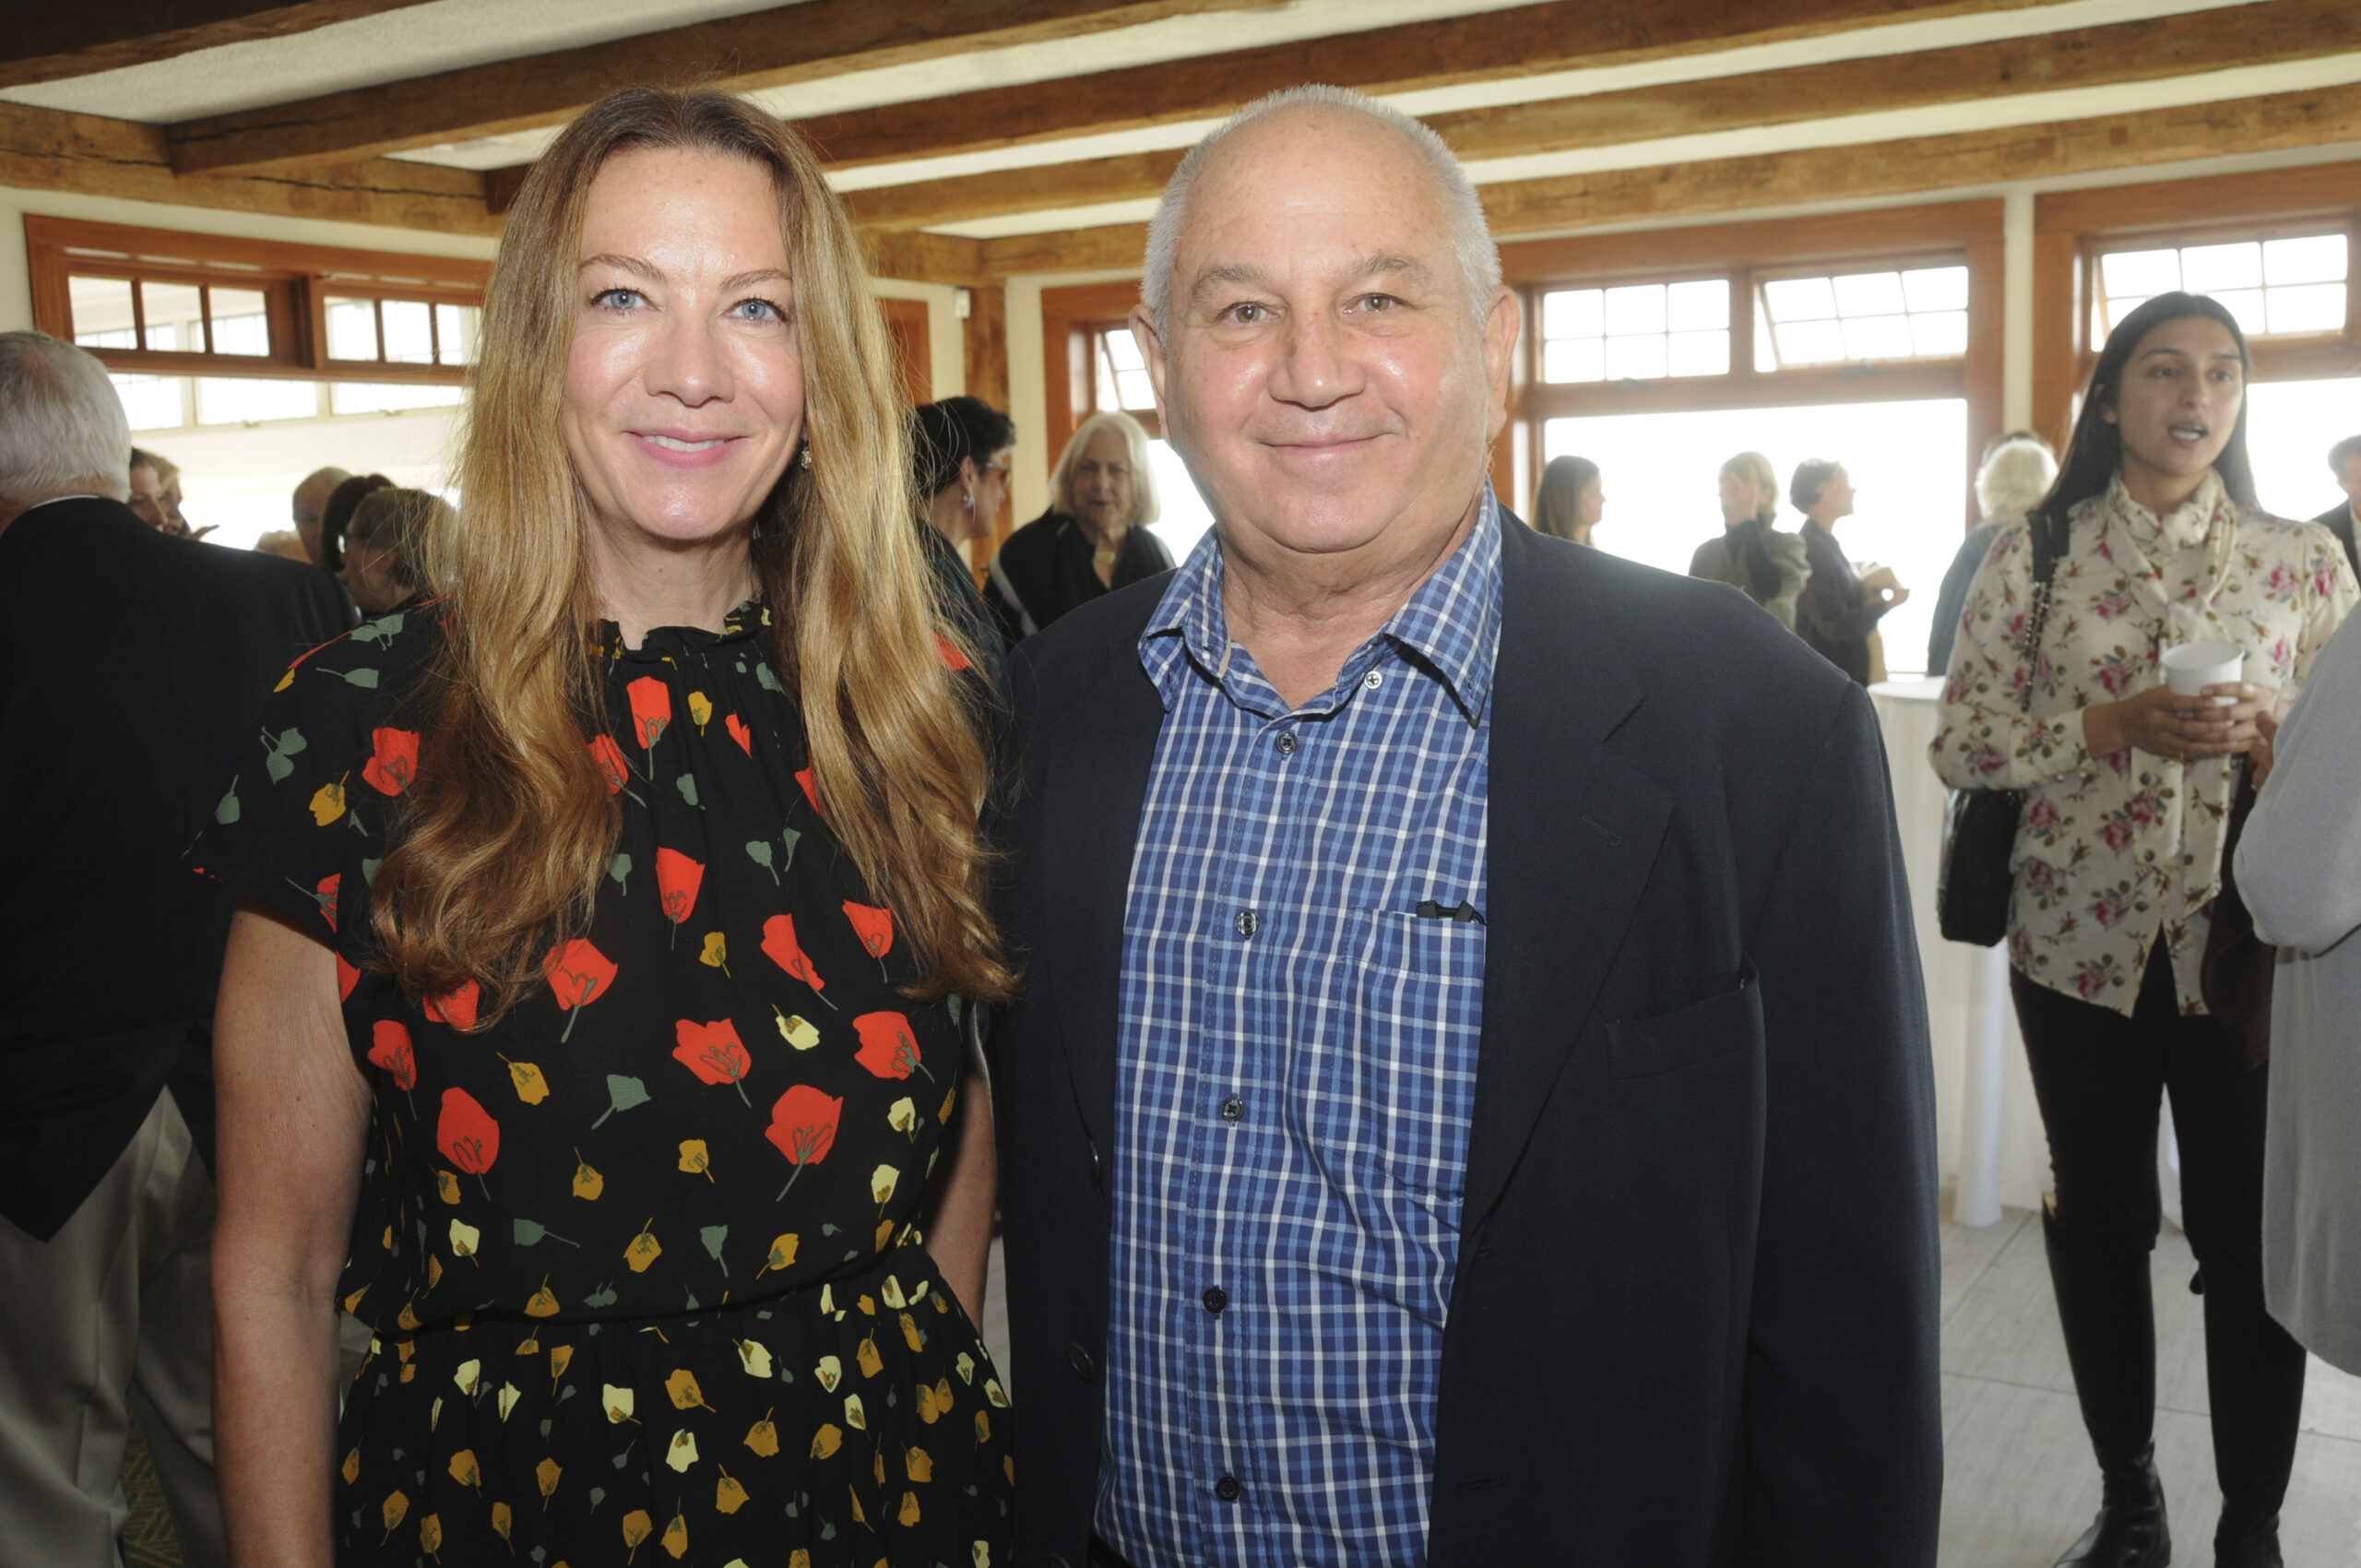 Christine Berry and Mike Solomon at the Ladies' Village Improvement Society (LVIS) of East Hampton's 30th annual 